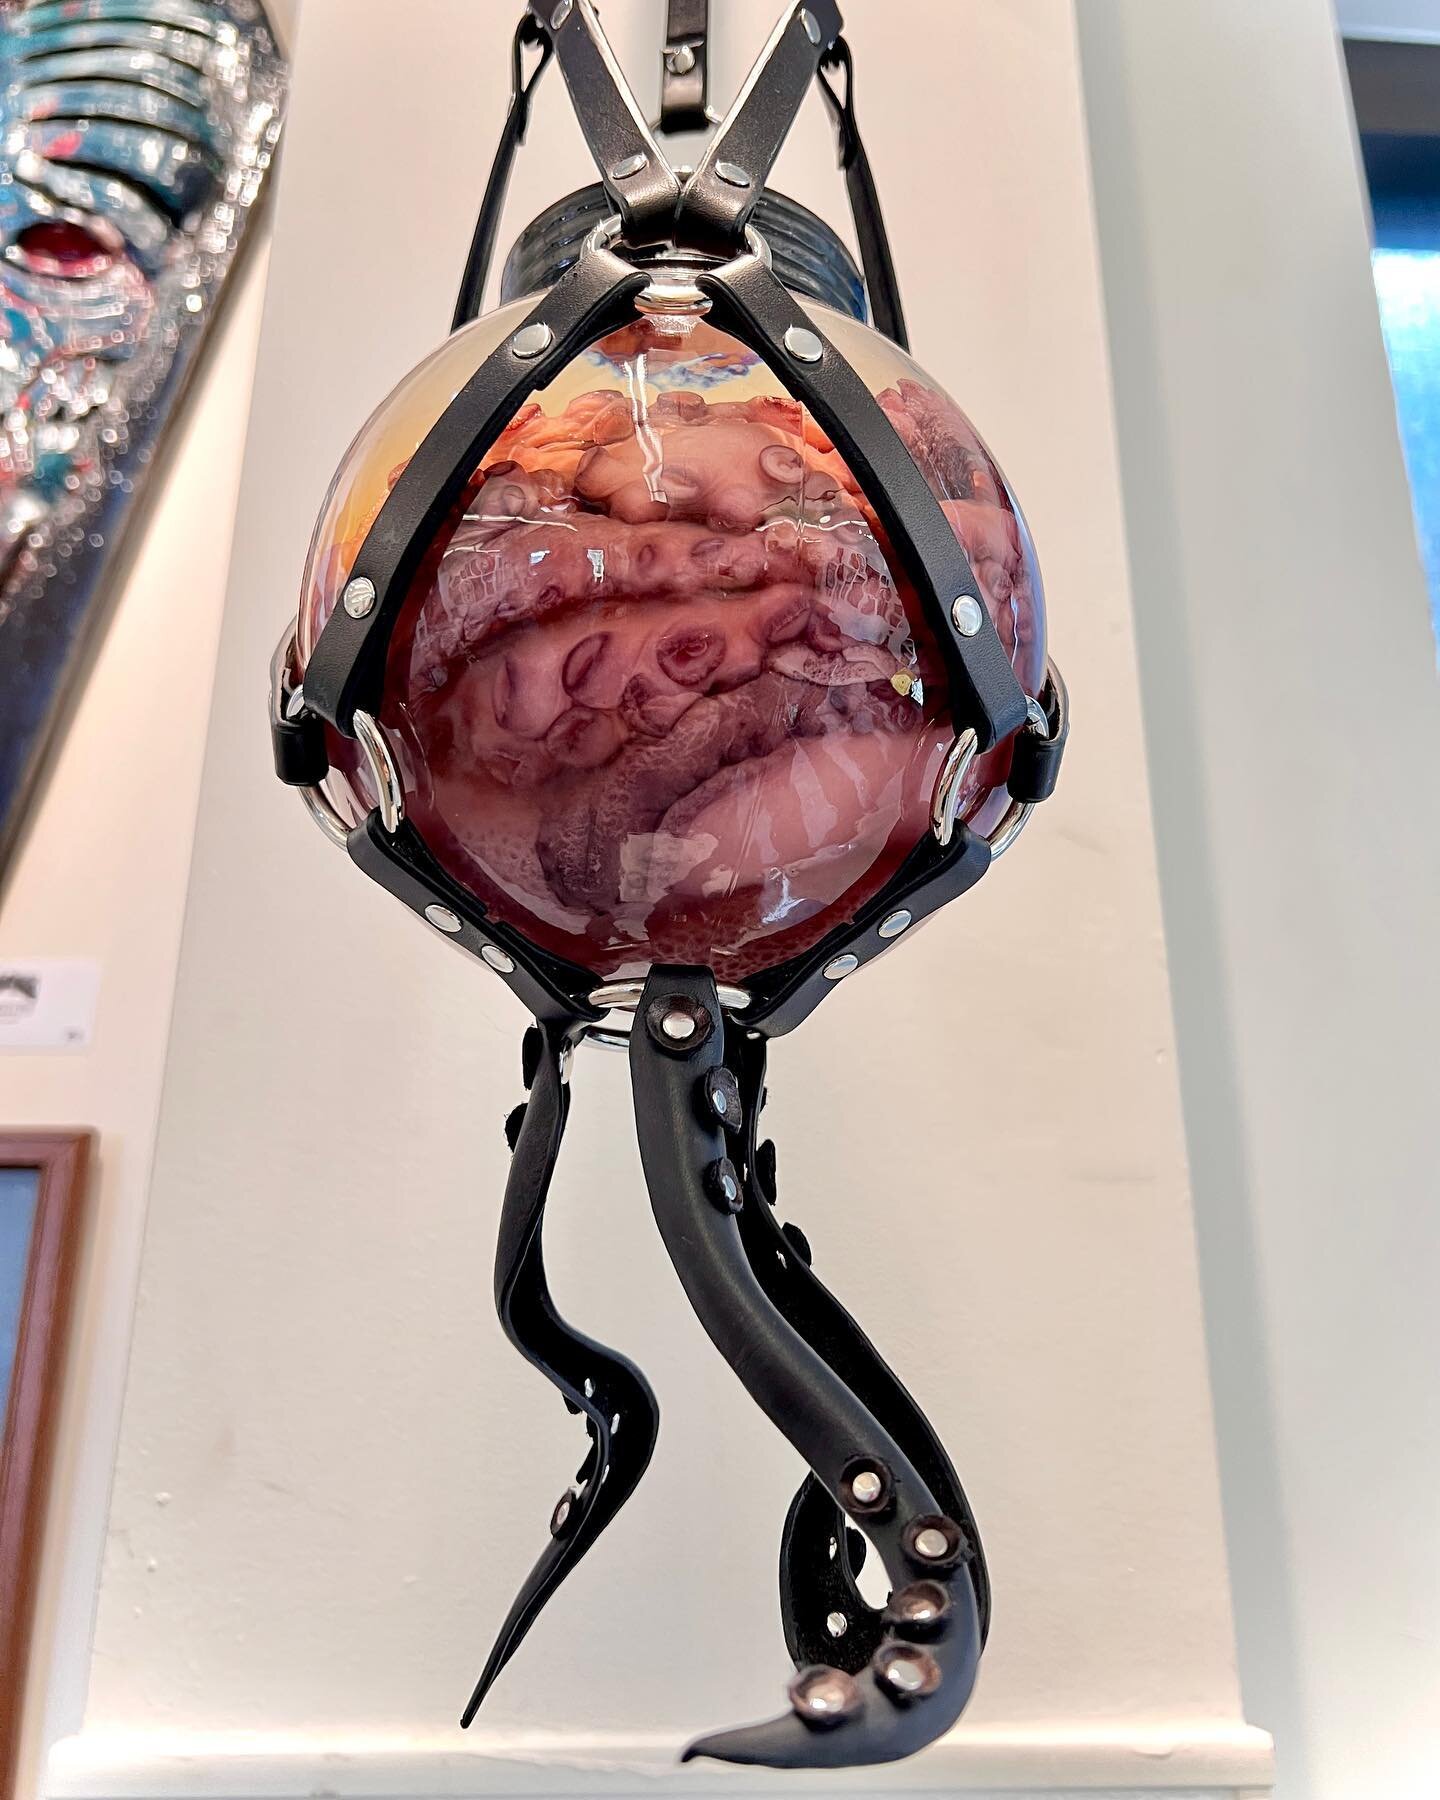 Harnessed Octopus. 
Wet preserved octopus in a glass globe hanging in a leather harness with wet molded leather tentacles hanging down. 🐙
On display at @otherworldlyartscollective Gods &amp; Monsters show at @jacflats 
Gallery hours Saturdays &amp; 